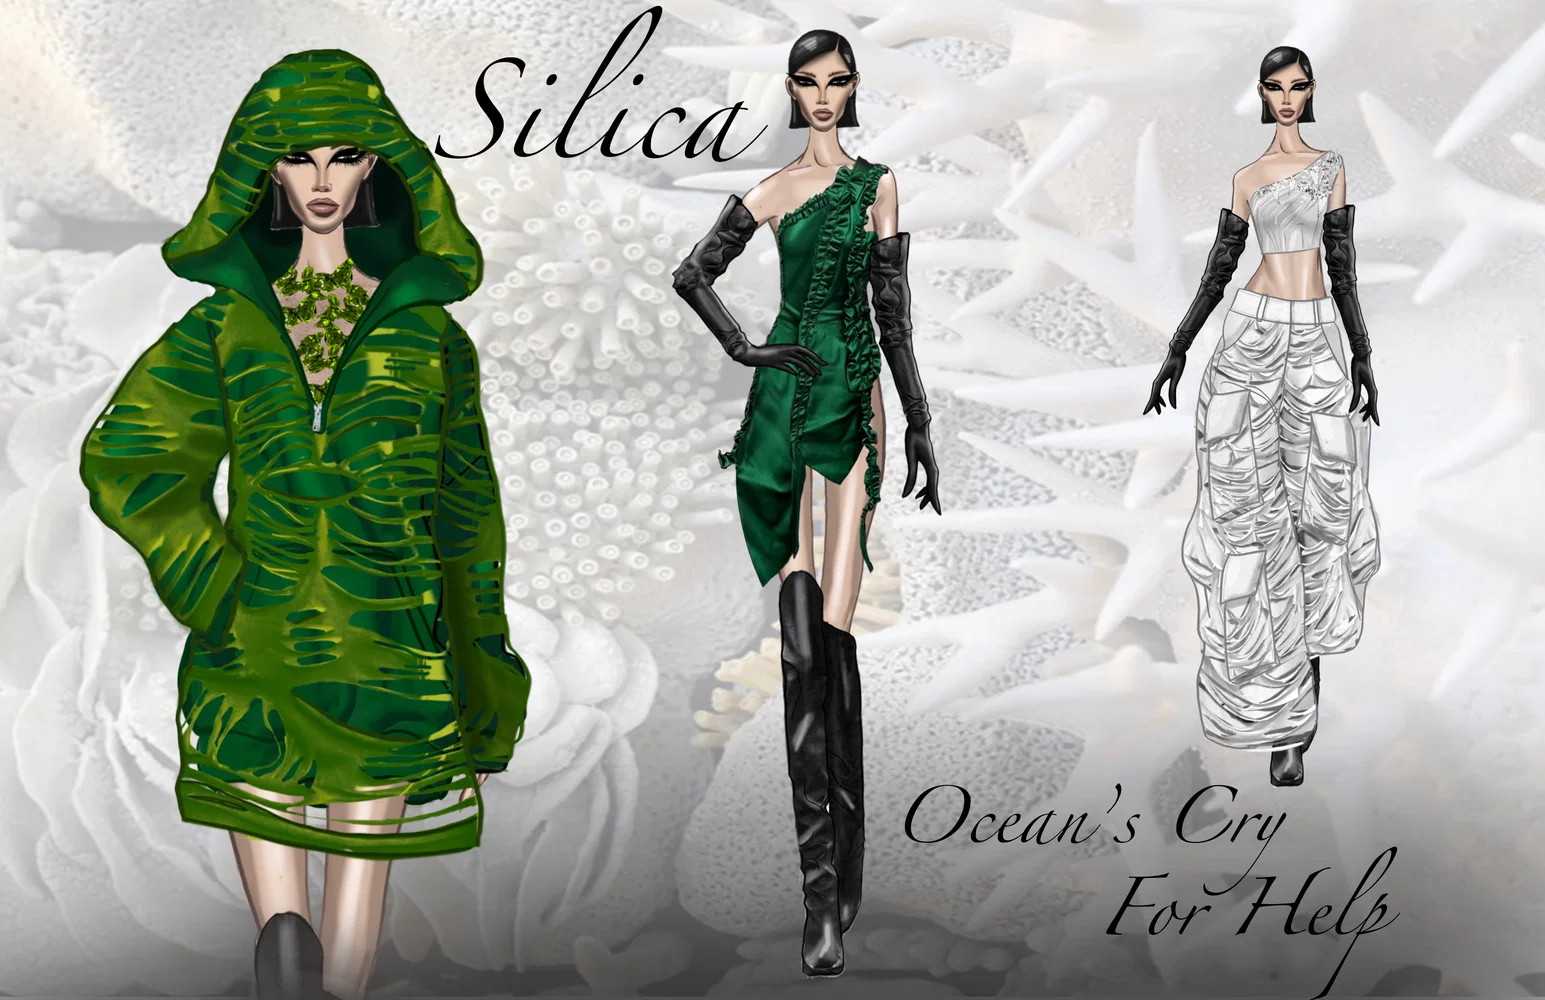 first line up of silica collection